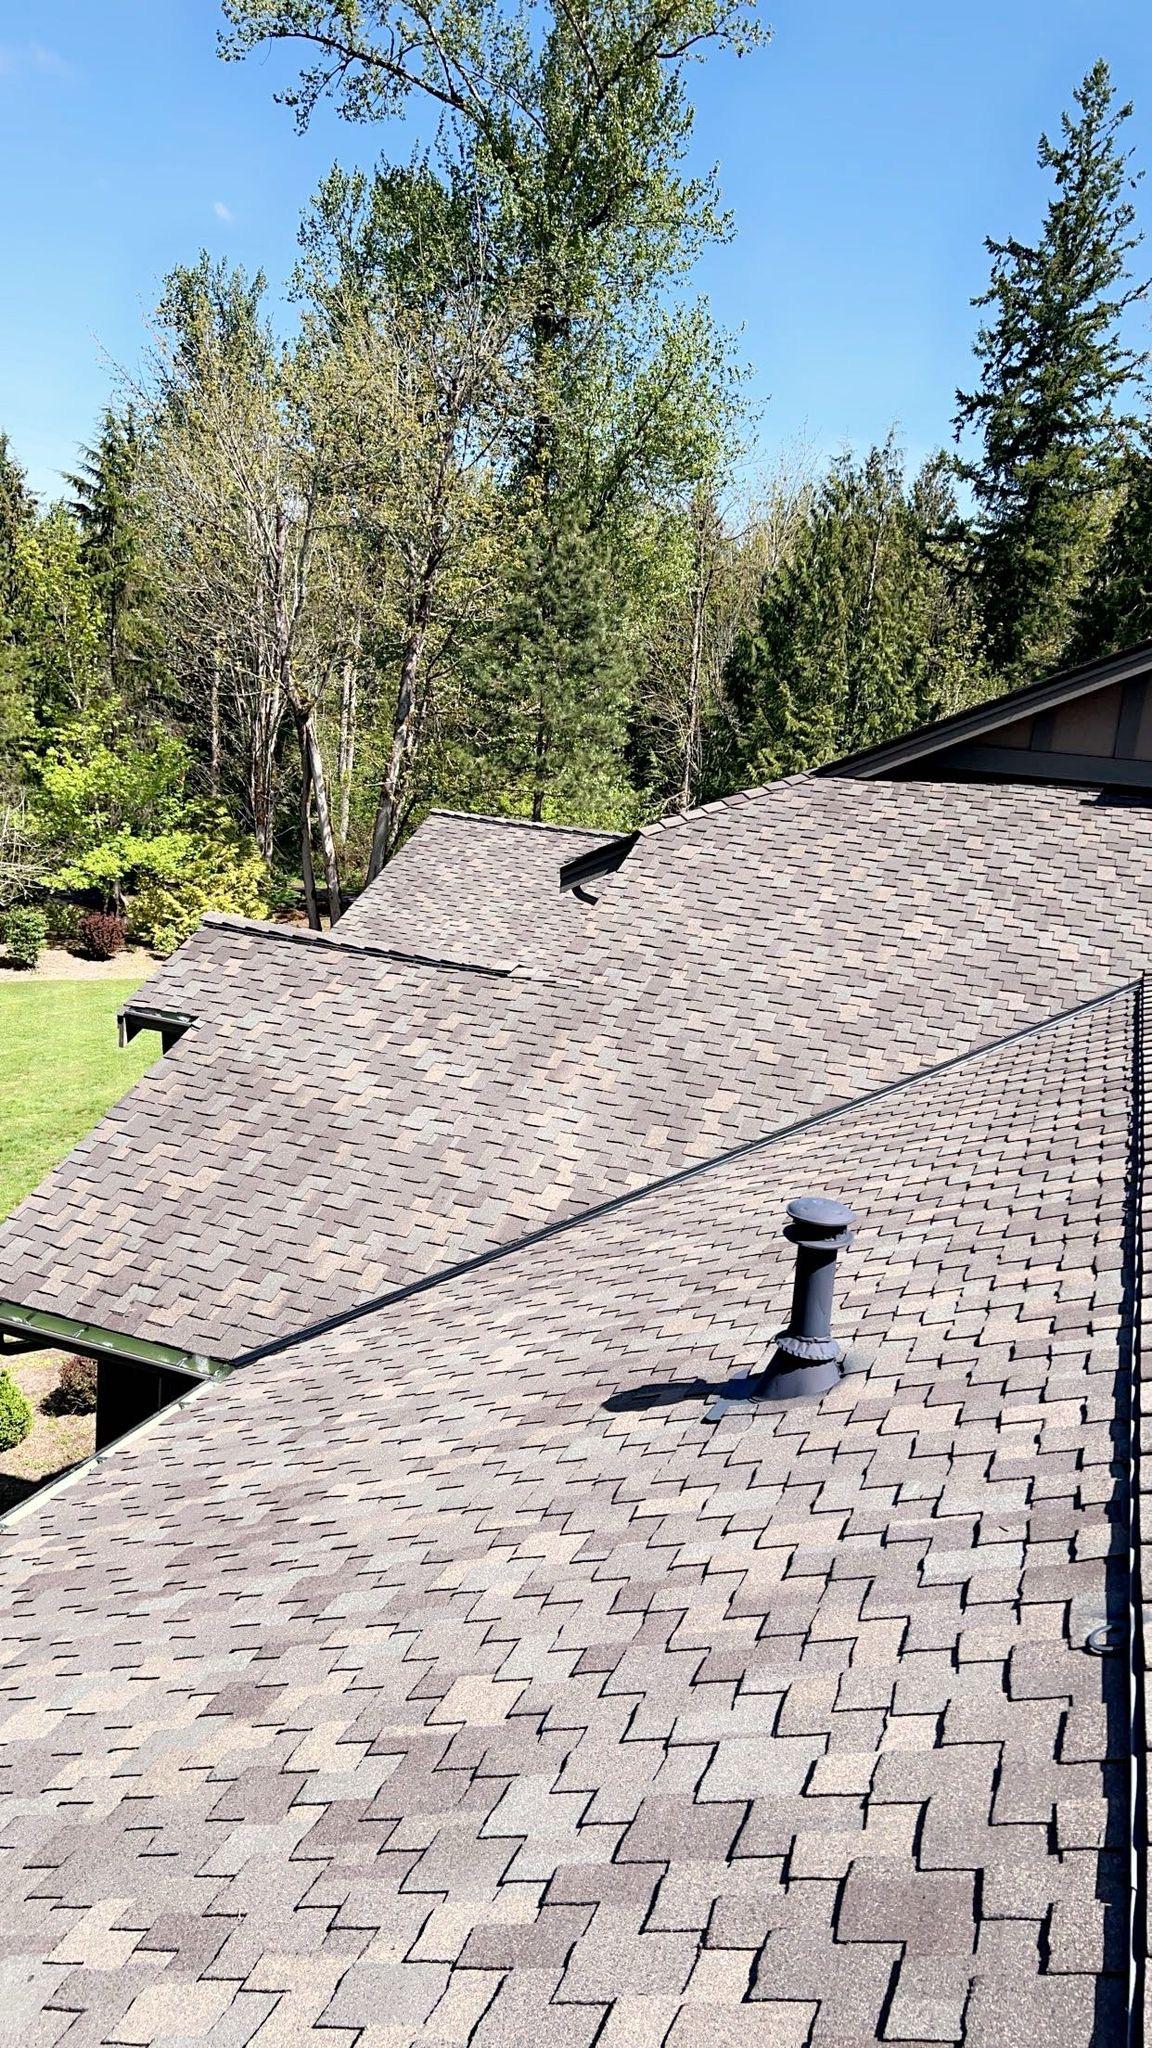 A roof with new asphalt shingles on it.